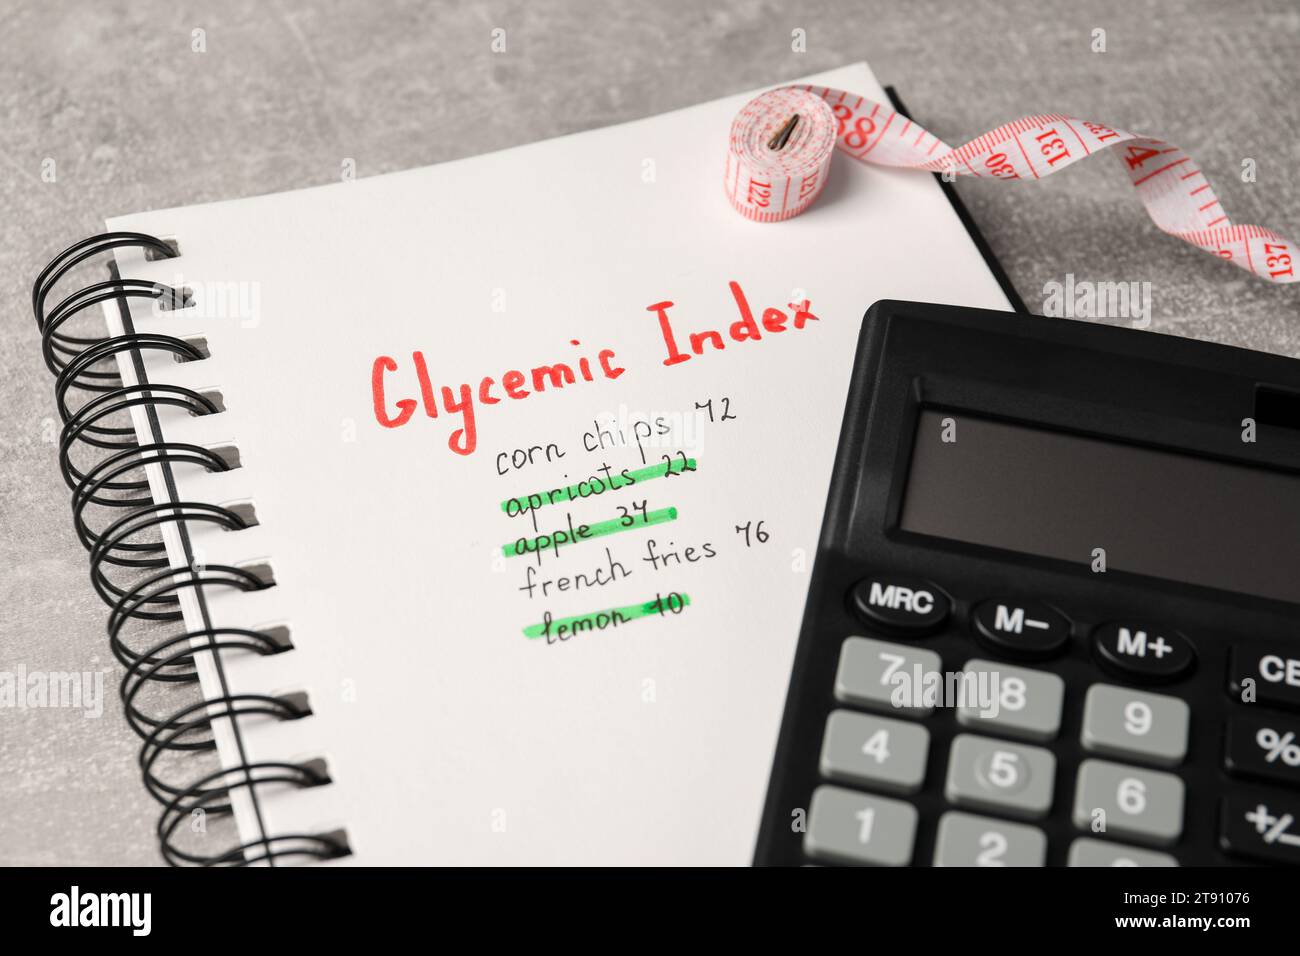 Glycemic Index. Notebook with information, measuring tape and calculator on light grey table, closeup Stock Photo